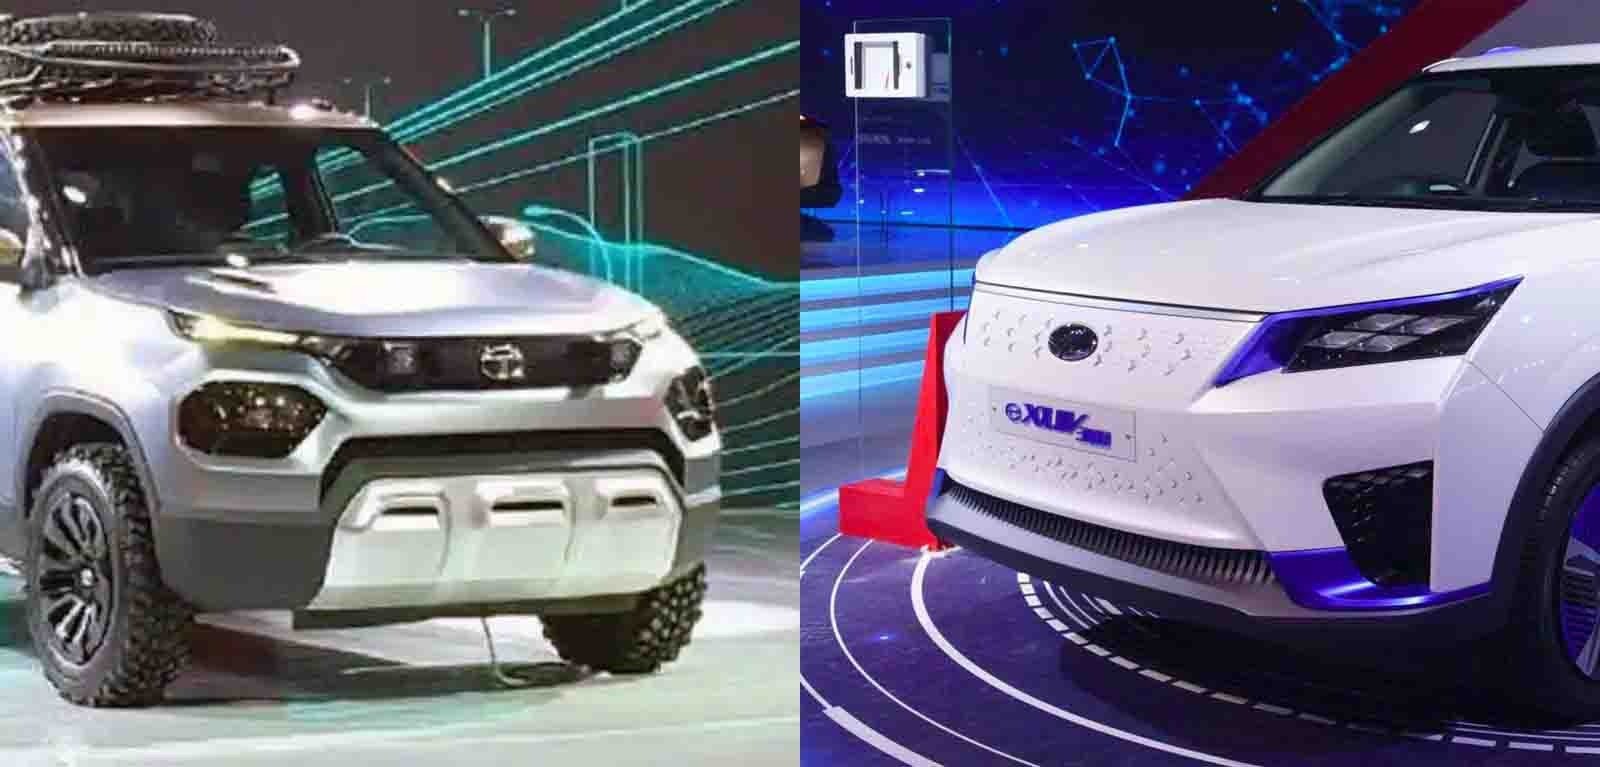 Upcoming Cars - Tata and Mahindra are going to launch these cars